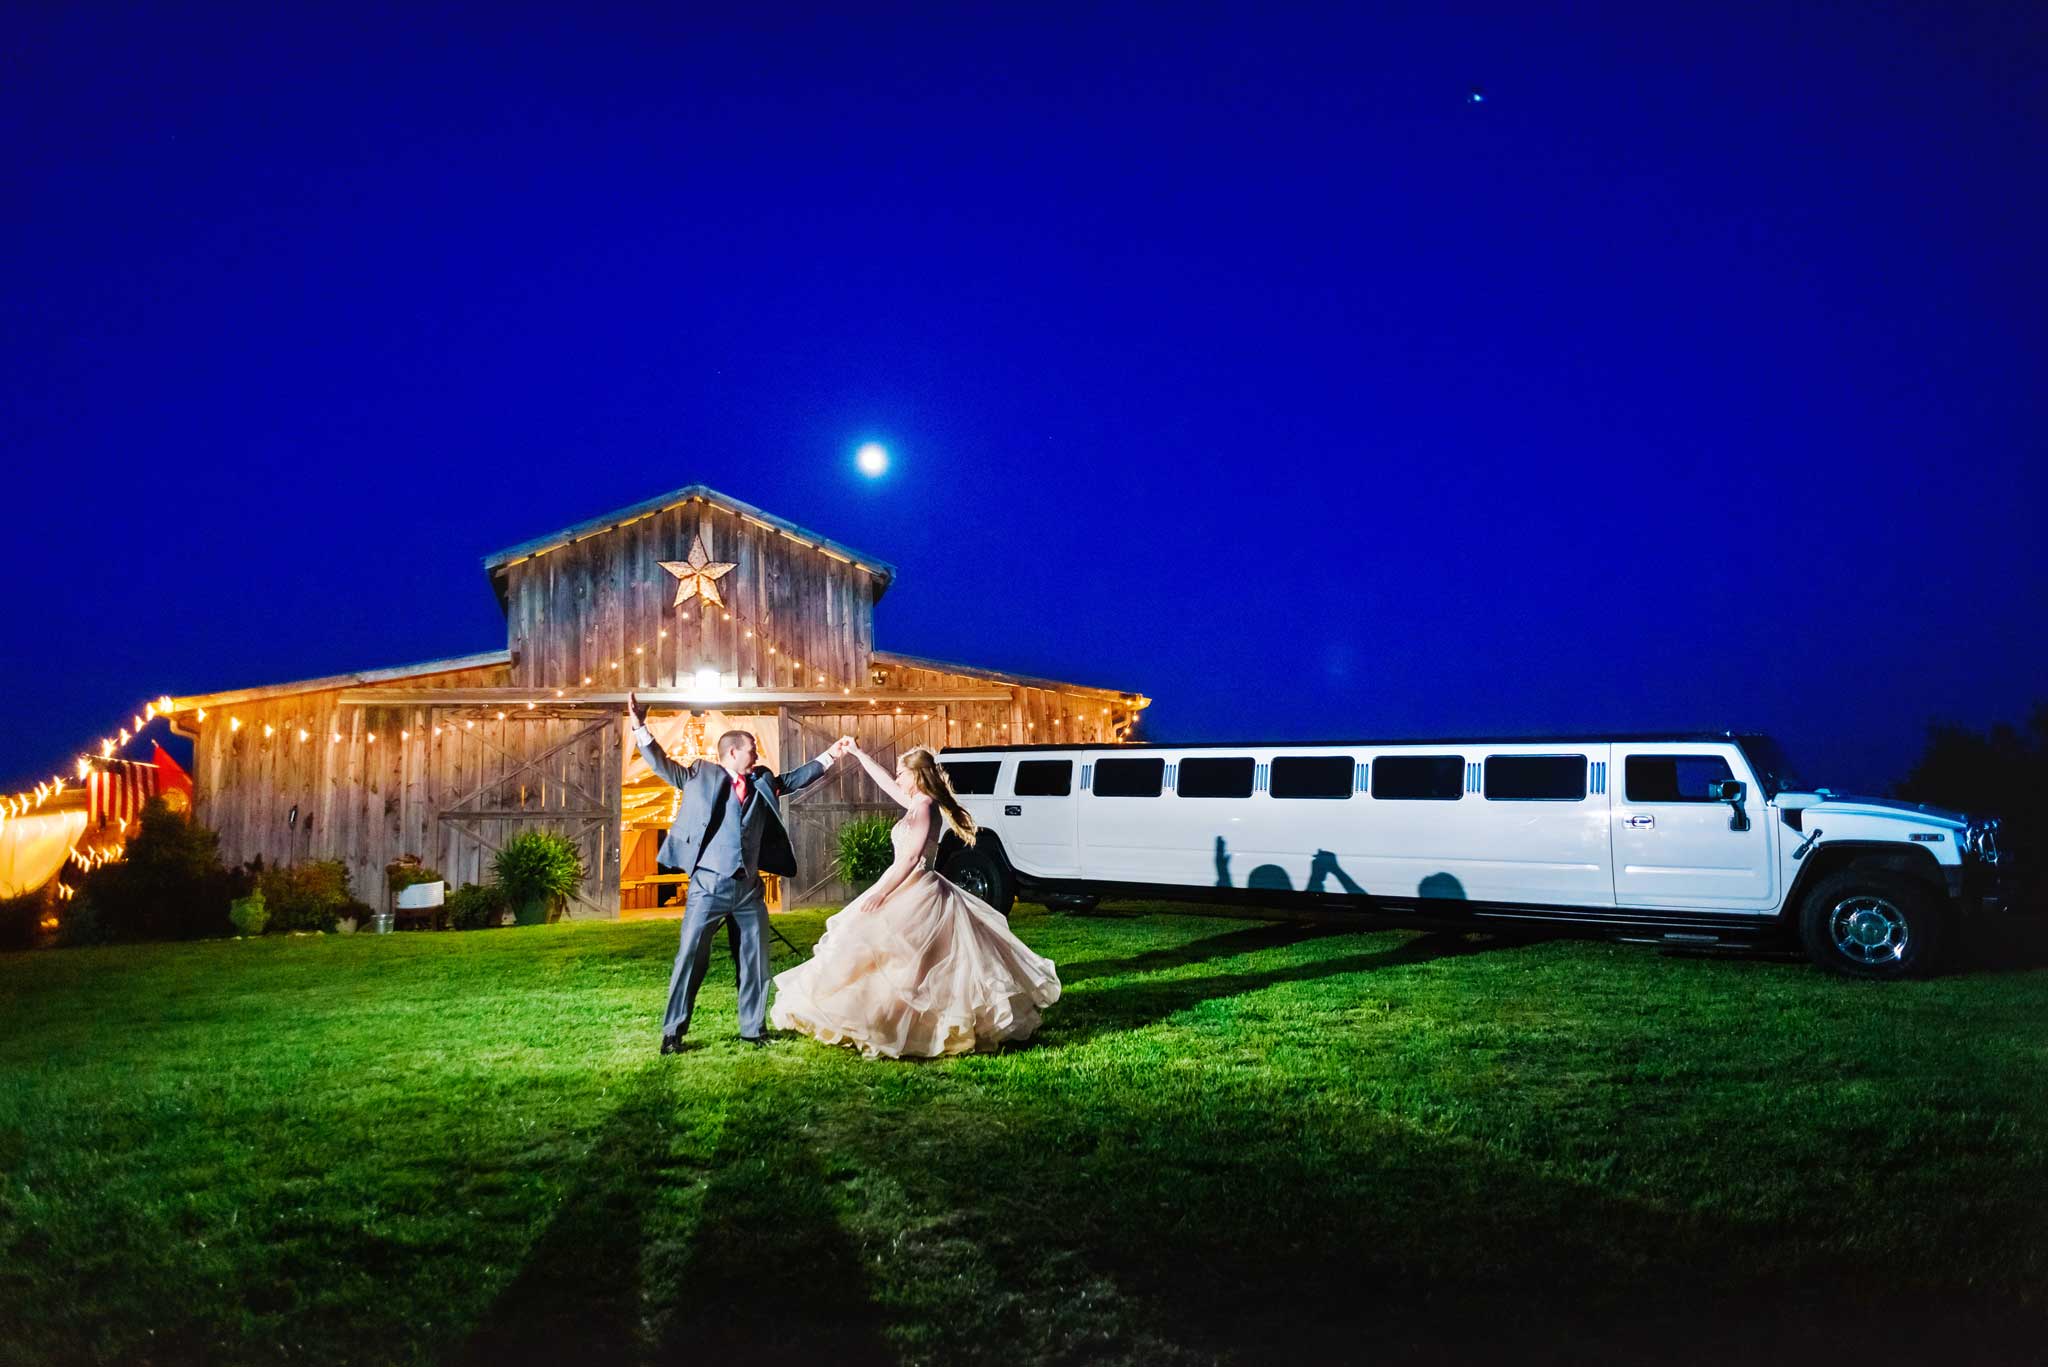 Nighttime dancing in front of the barnat drewia hill with a white hummer limo and bride and groom